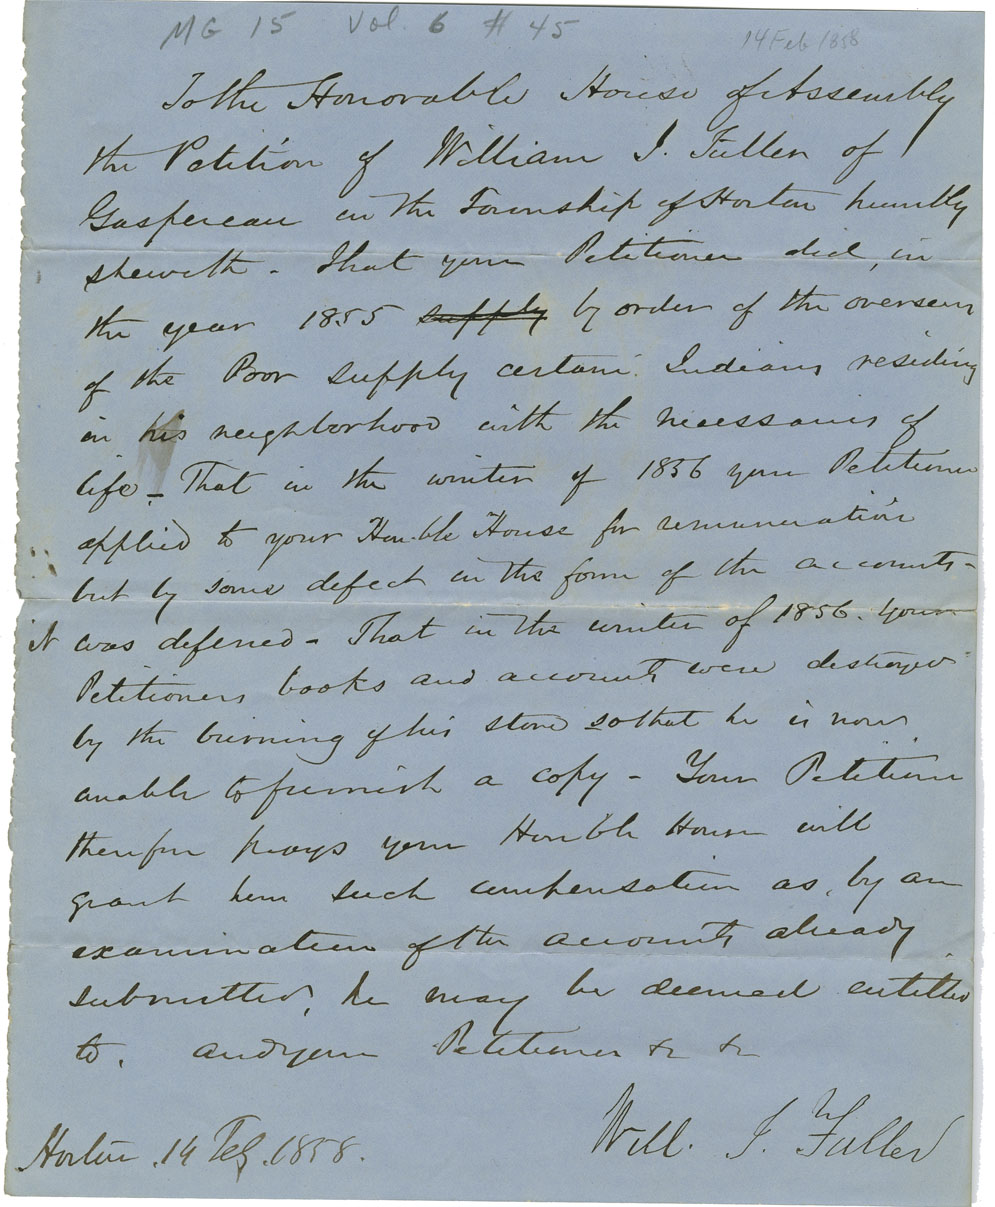 Petition of William J. Fuller of Gaspereau for payment for services to Mi'kmaq.